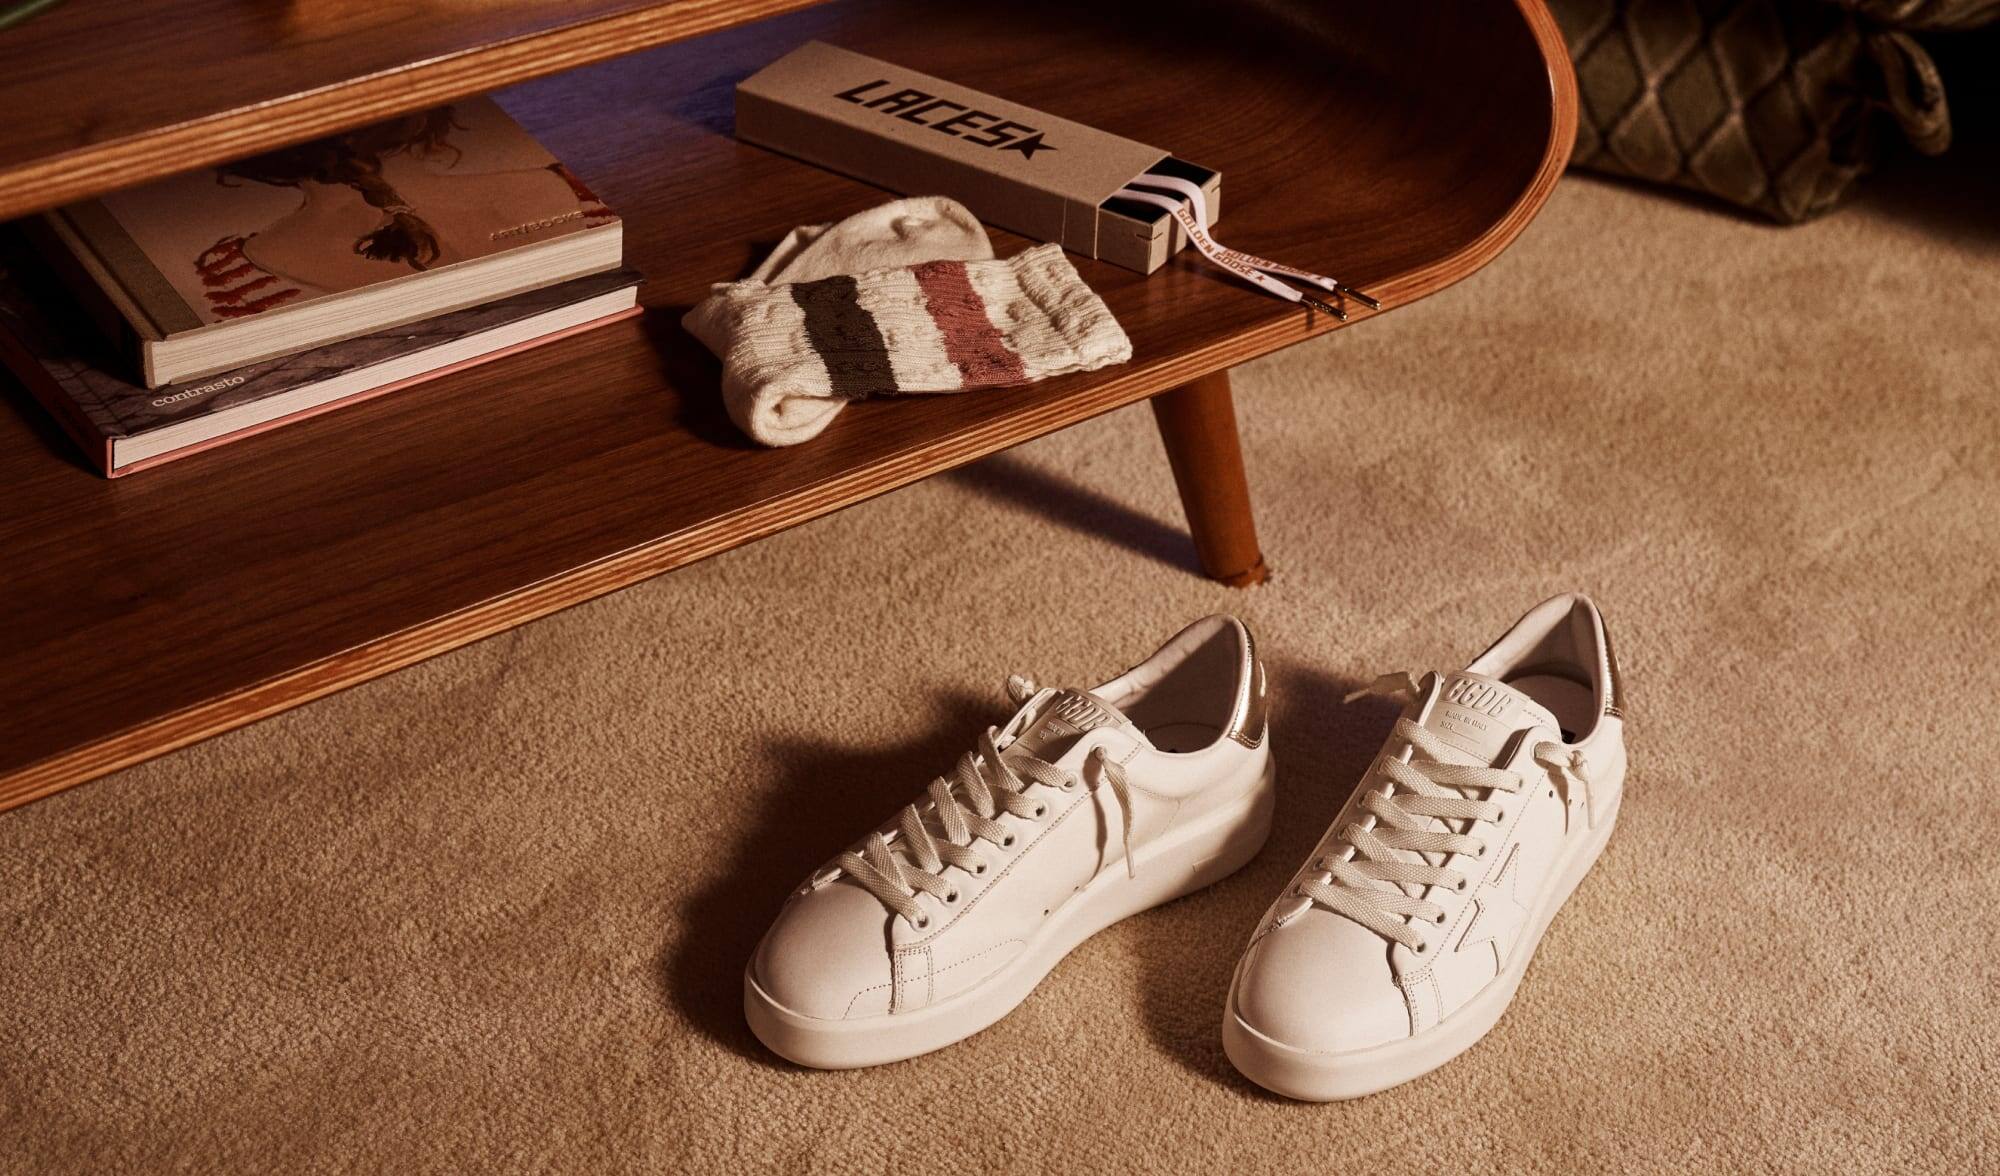 white-pure-star-sneakers-on-beige-moquet-under-wooden-table-with-books-socks-and-laces-on-bottom-shelf